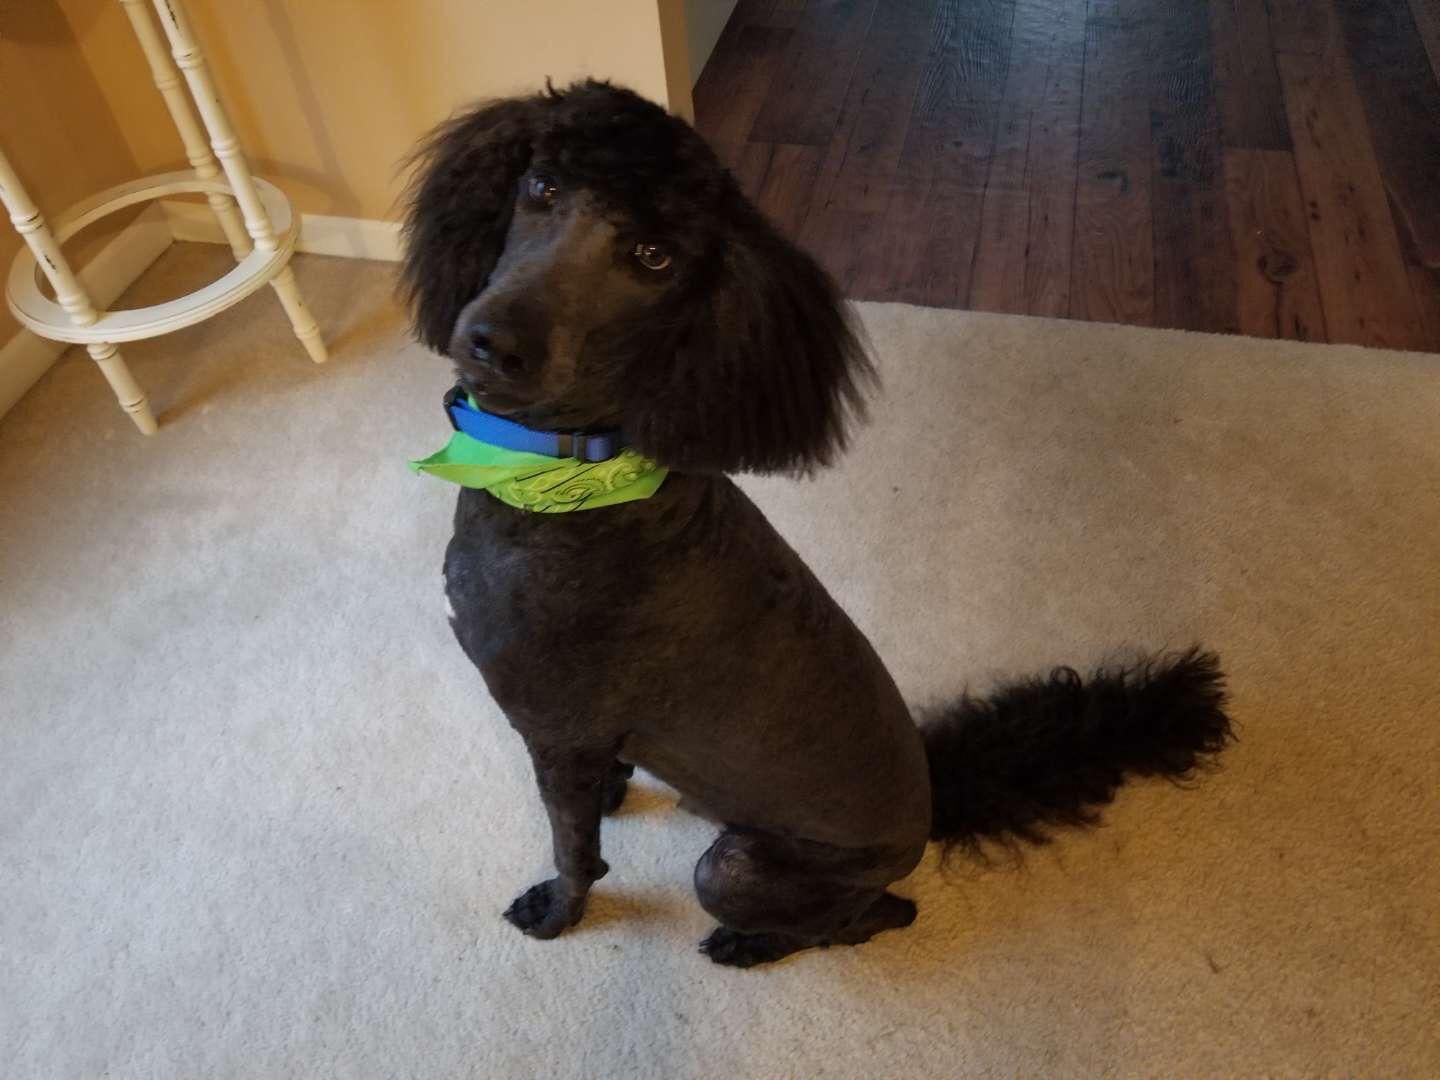 My wife took our dog to the groomer and picked up Severus Snape